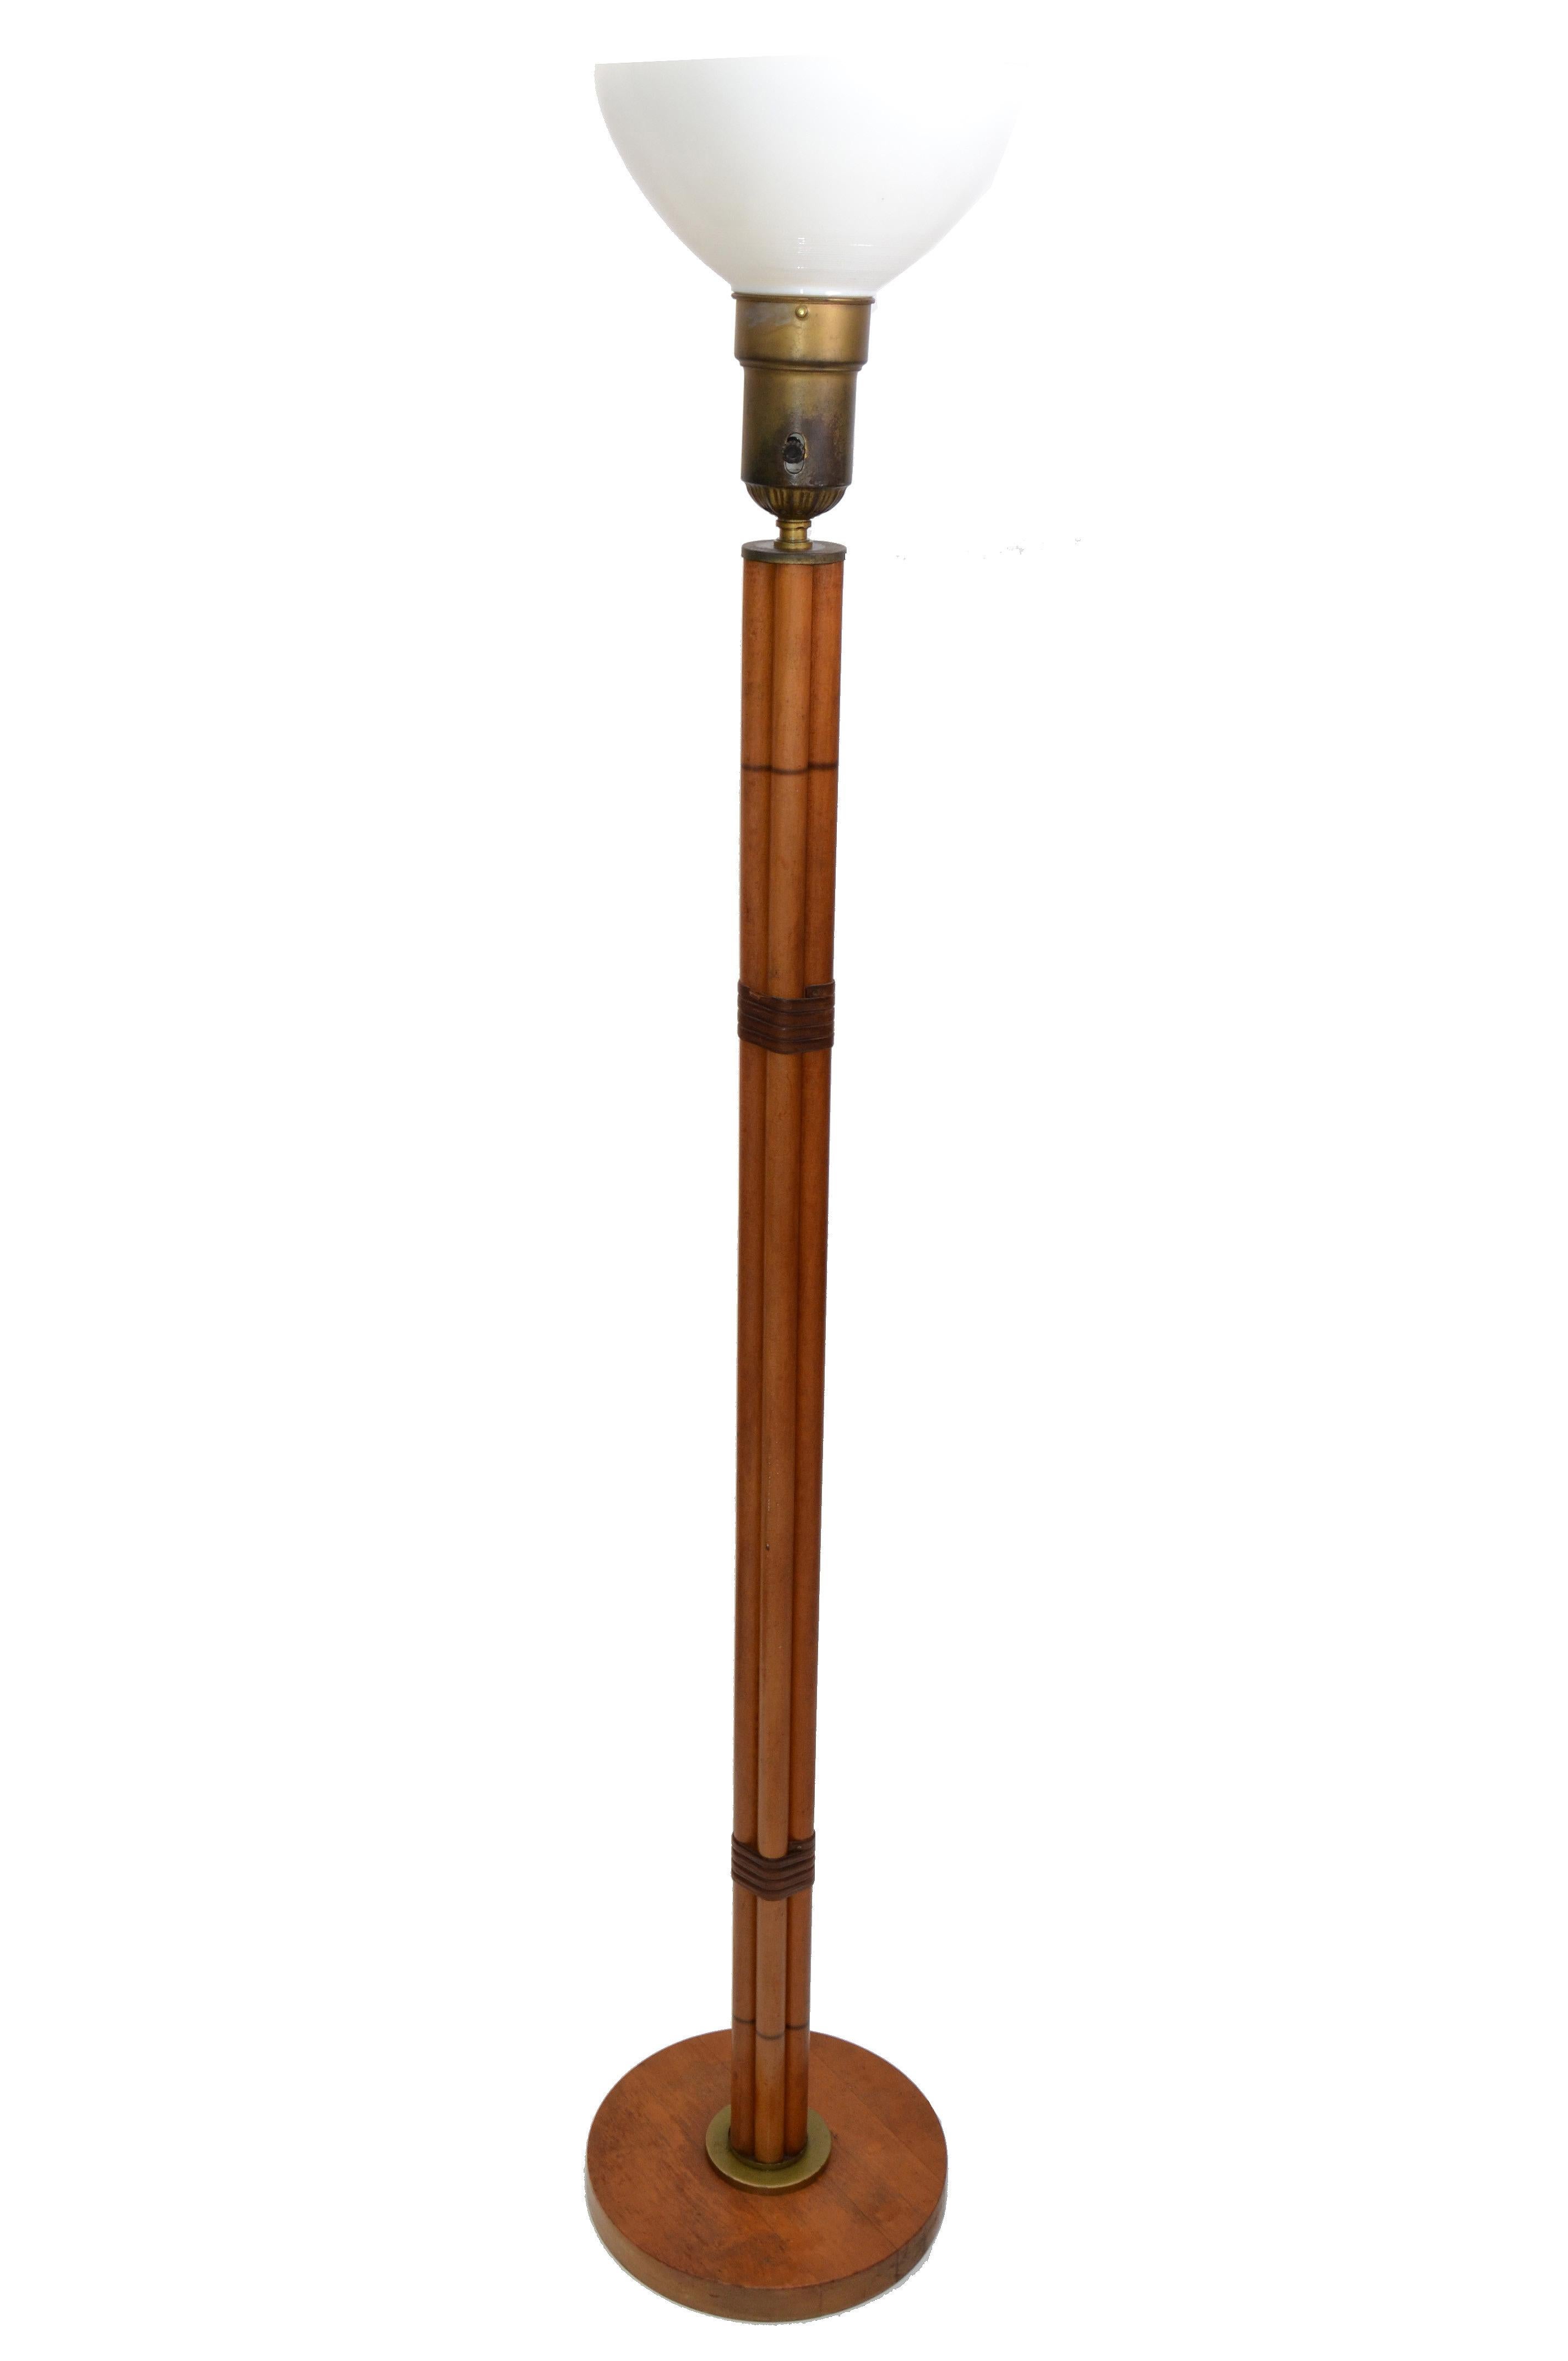 Handcrafted tall Mid-Century Modern bamboo and leather floor lamp with brass details and milk glass globe.
Is wired for the U.S. and uses a max. 60 watts light bulb.
Great addition for Your Sunroom.